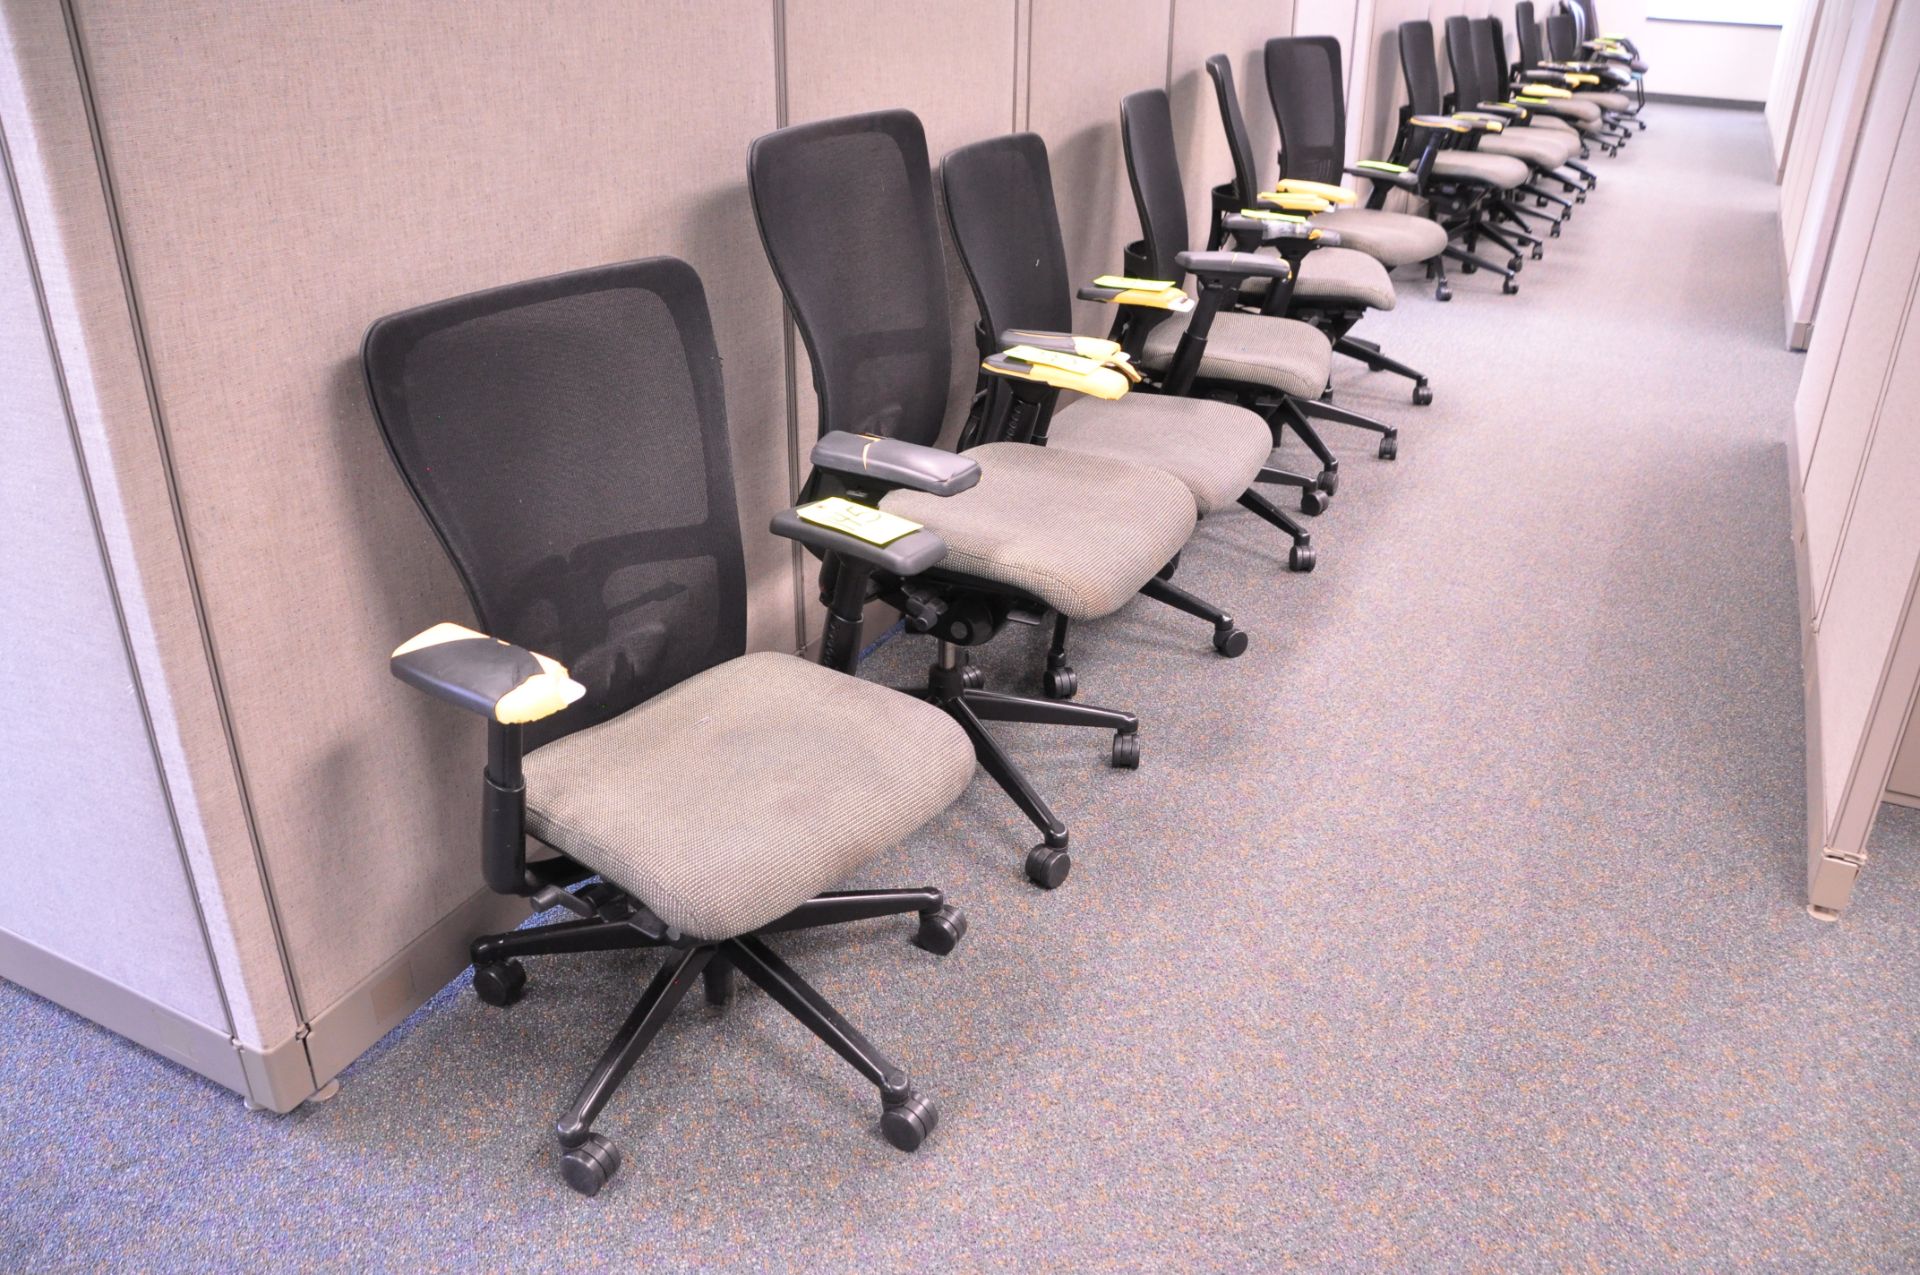 Lot-(6) Ergonomic Black/Grey Swivel Office Chairs in (1) Group, (Located 1st Floor Offices) - Image 2 of 2